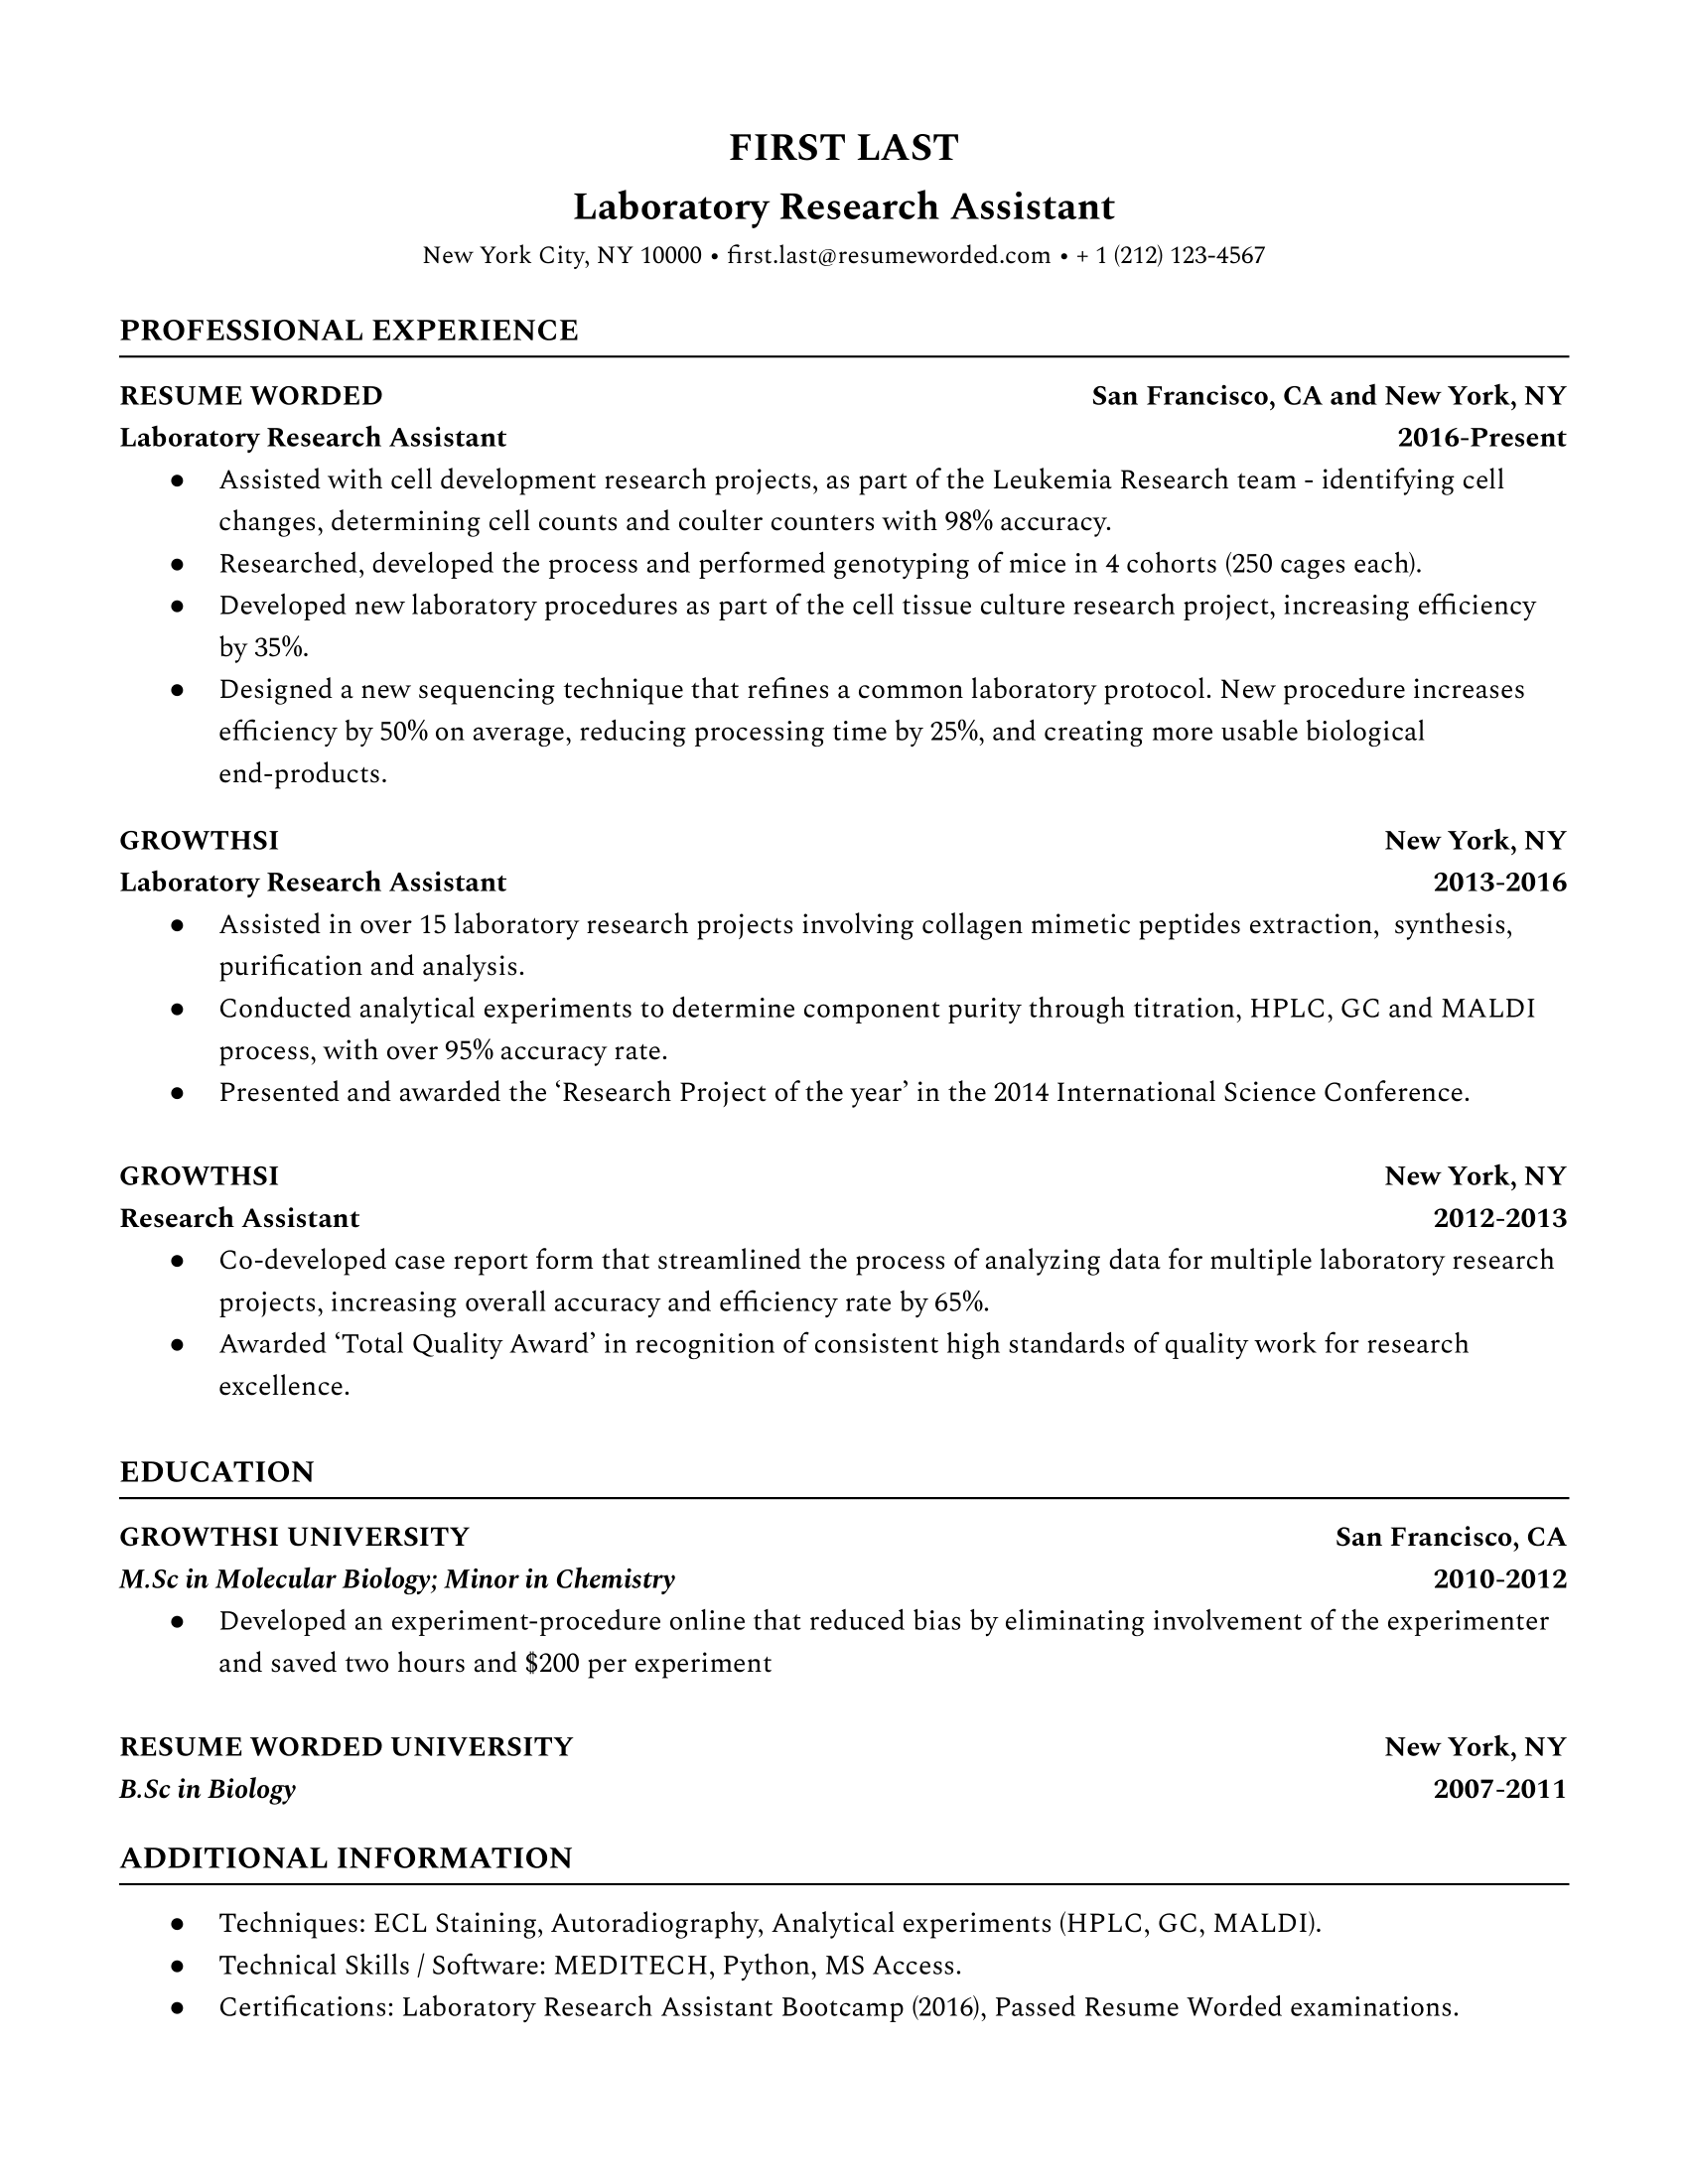 Laboratory research assistant resume summary example featuring bullet points with strong action verbs and clear metrics